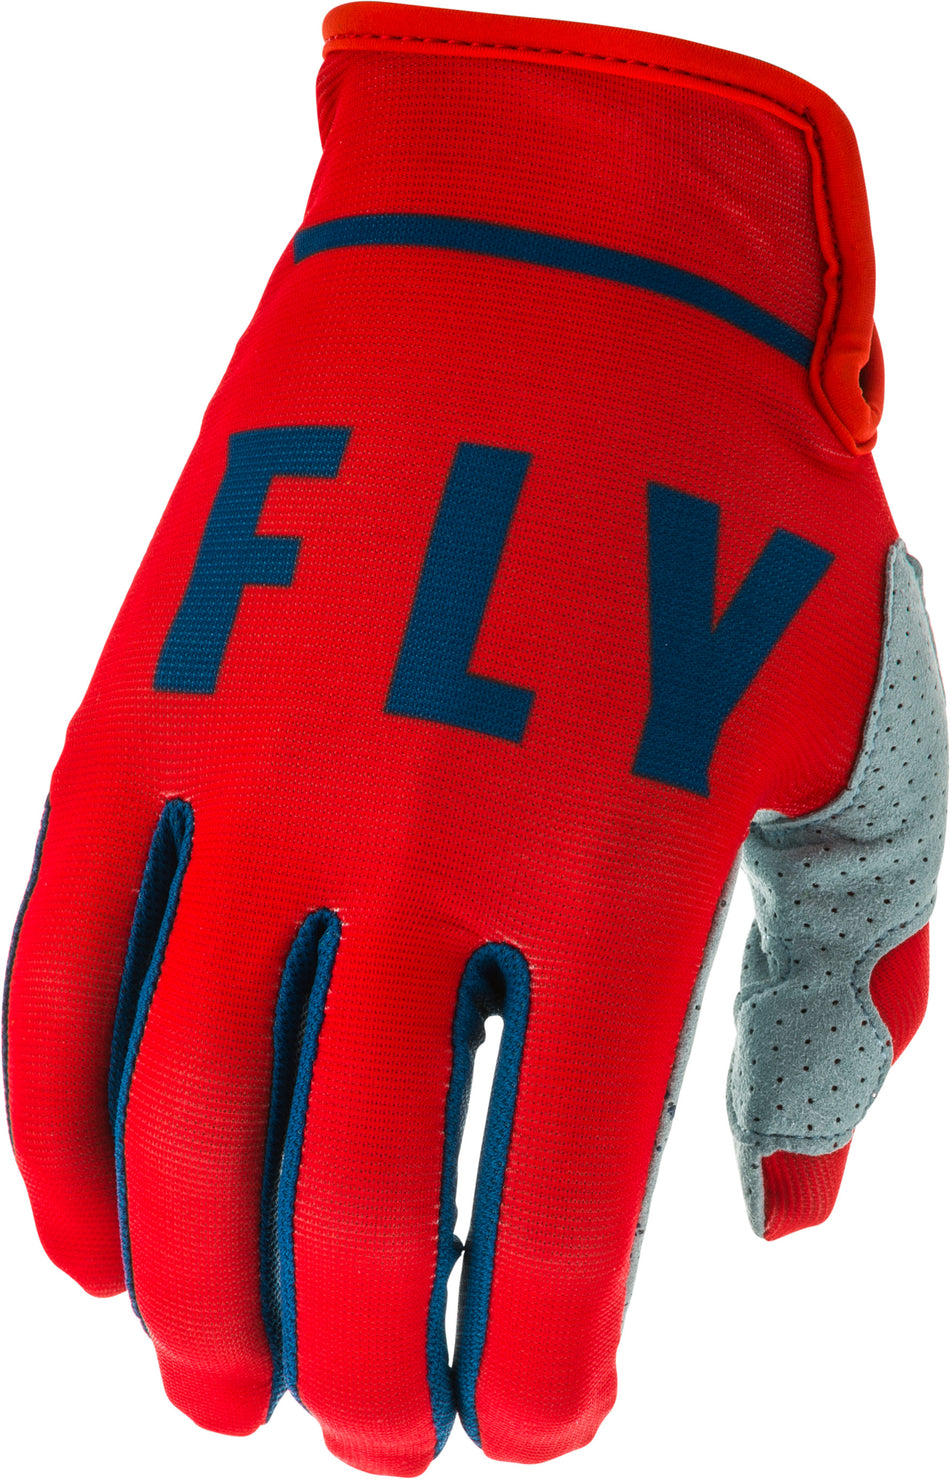 FLY RACING Lite Gloves Red/Slate/Navy Sz 10 373-71210